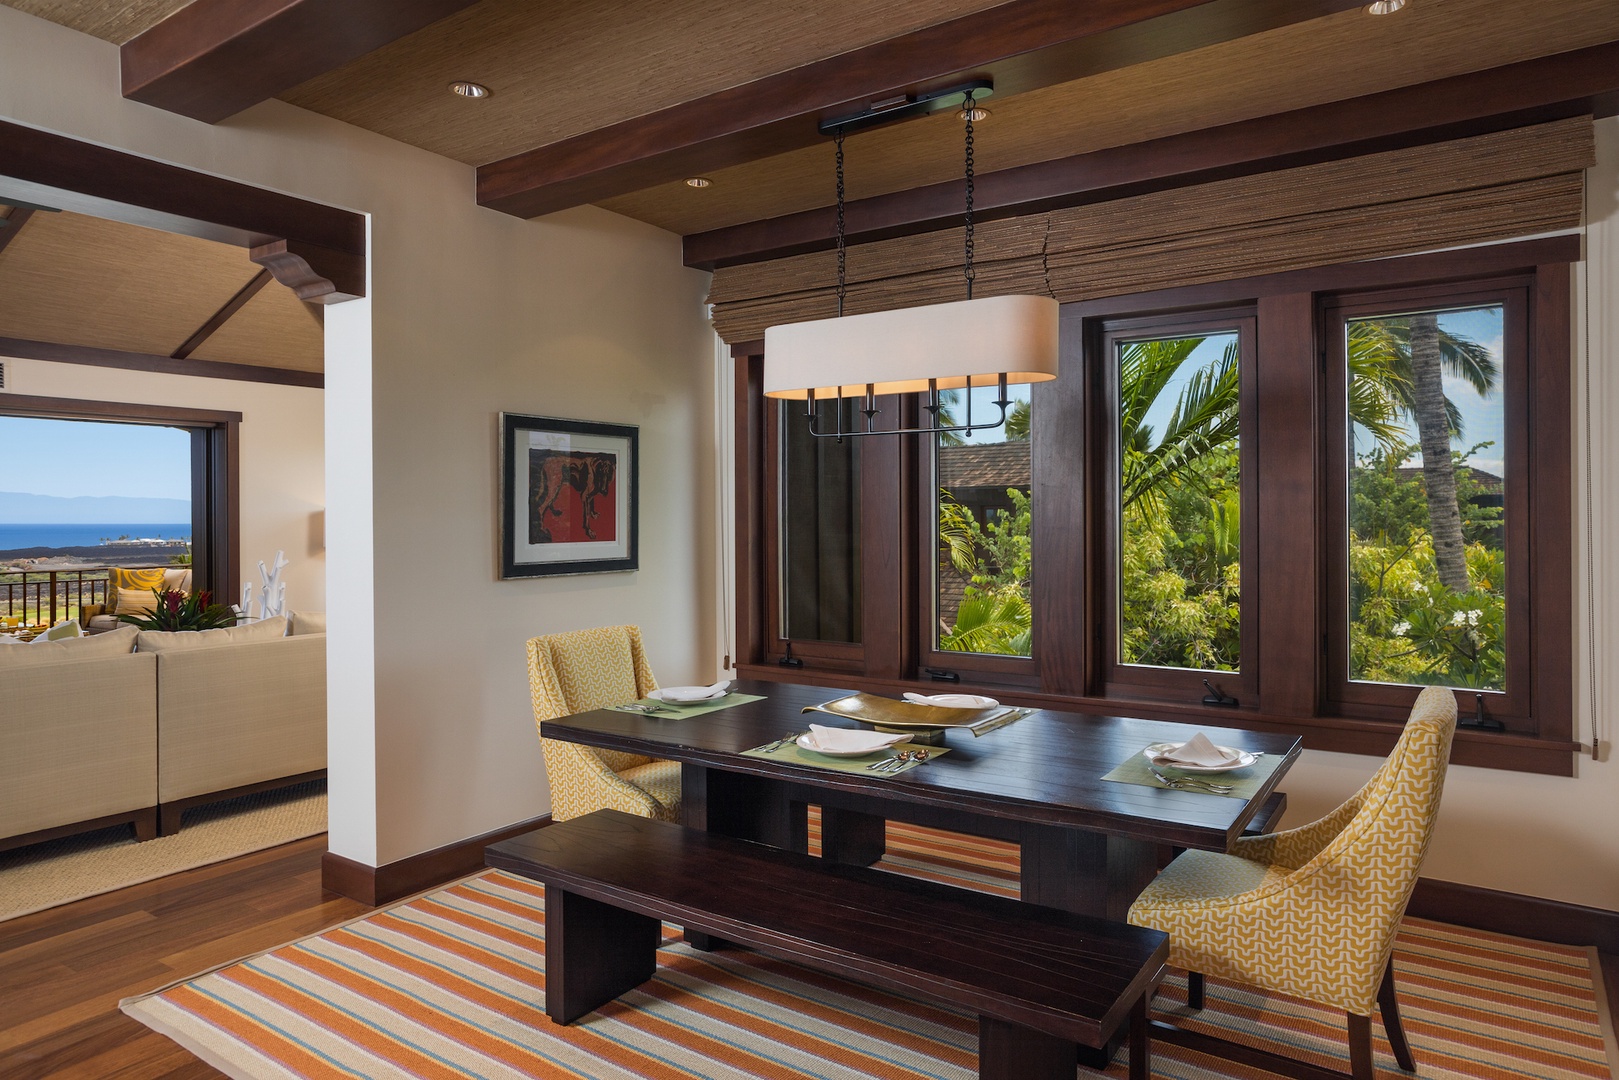 Kailua Kona Vacation Rentals, 2BD Hali'ipua Villa (108) at Four Seasons Resort at Hualalai - Formal dining room with seating for 6, adjacent to the kitchen and great room.